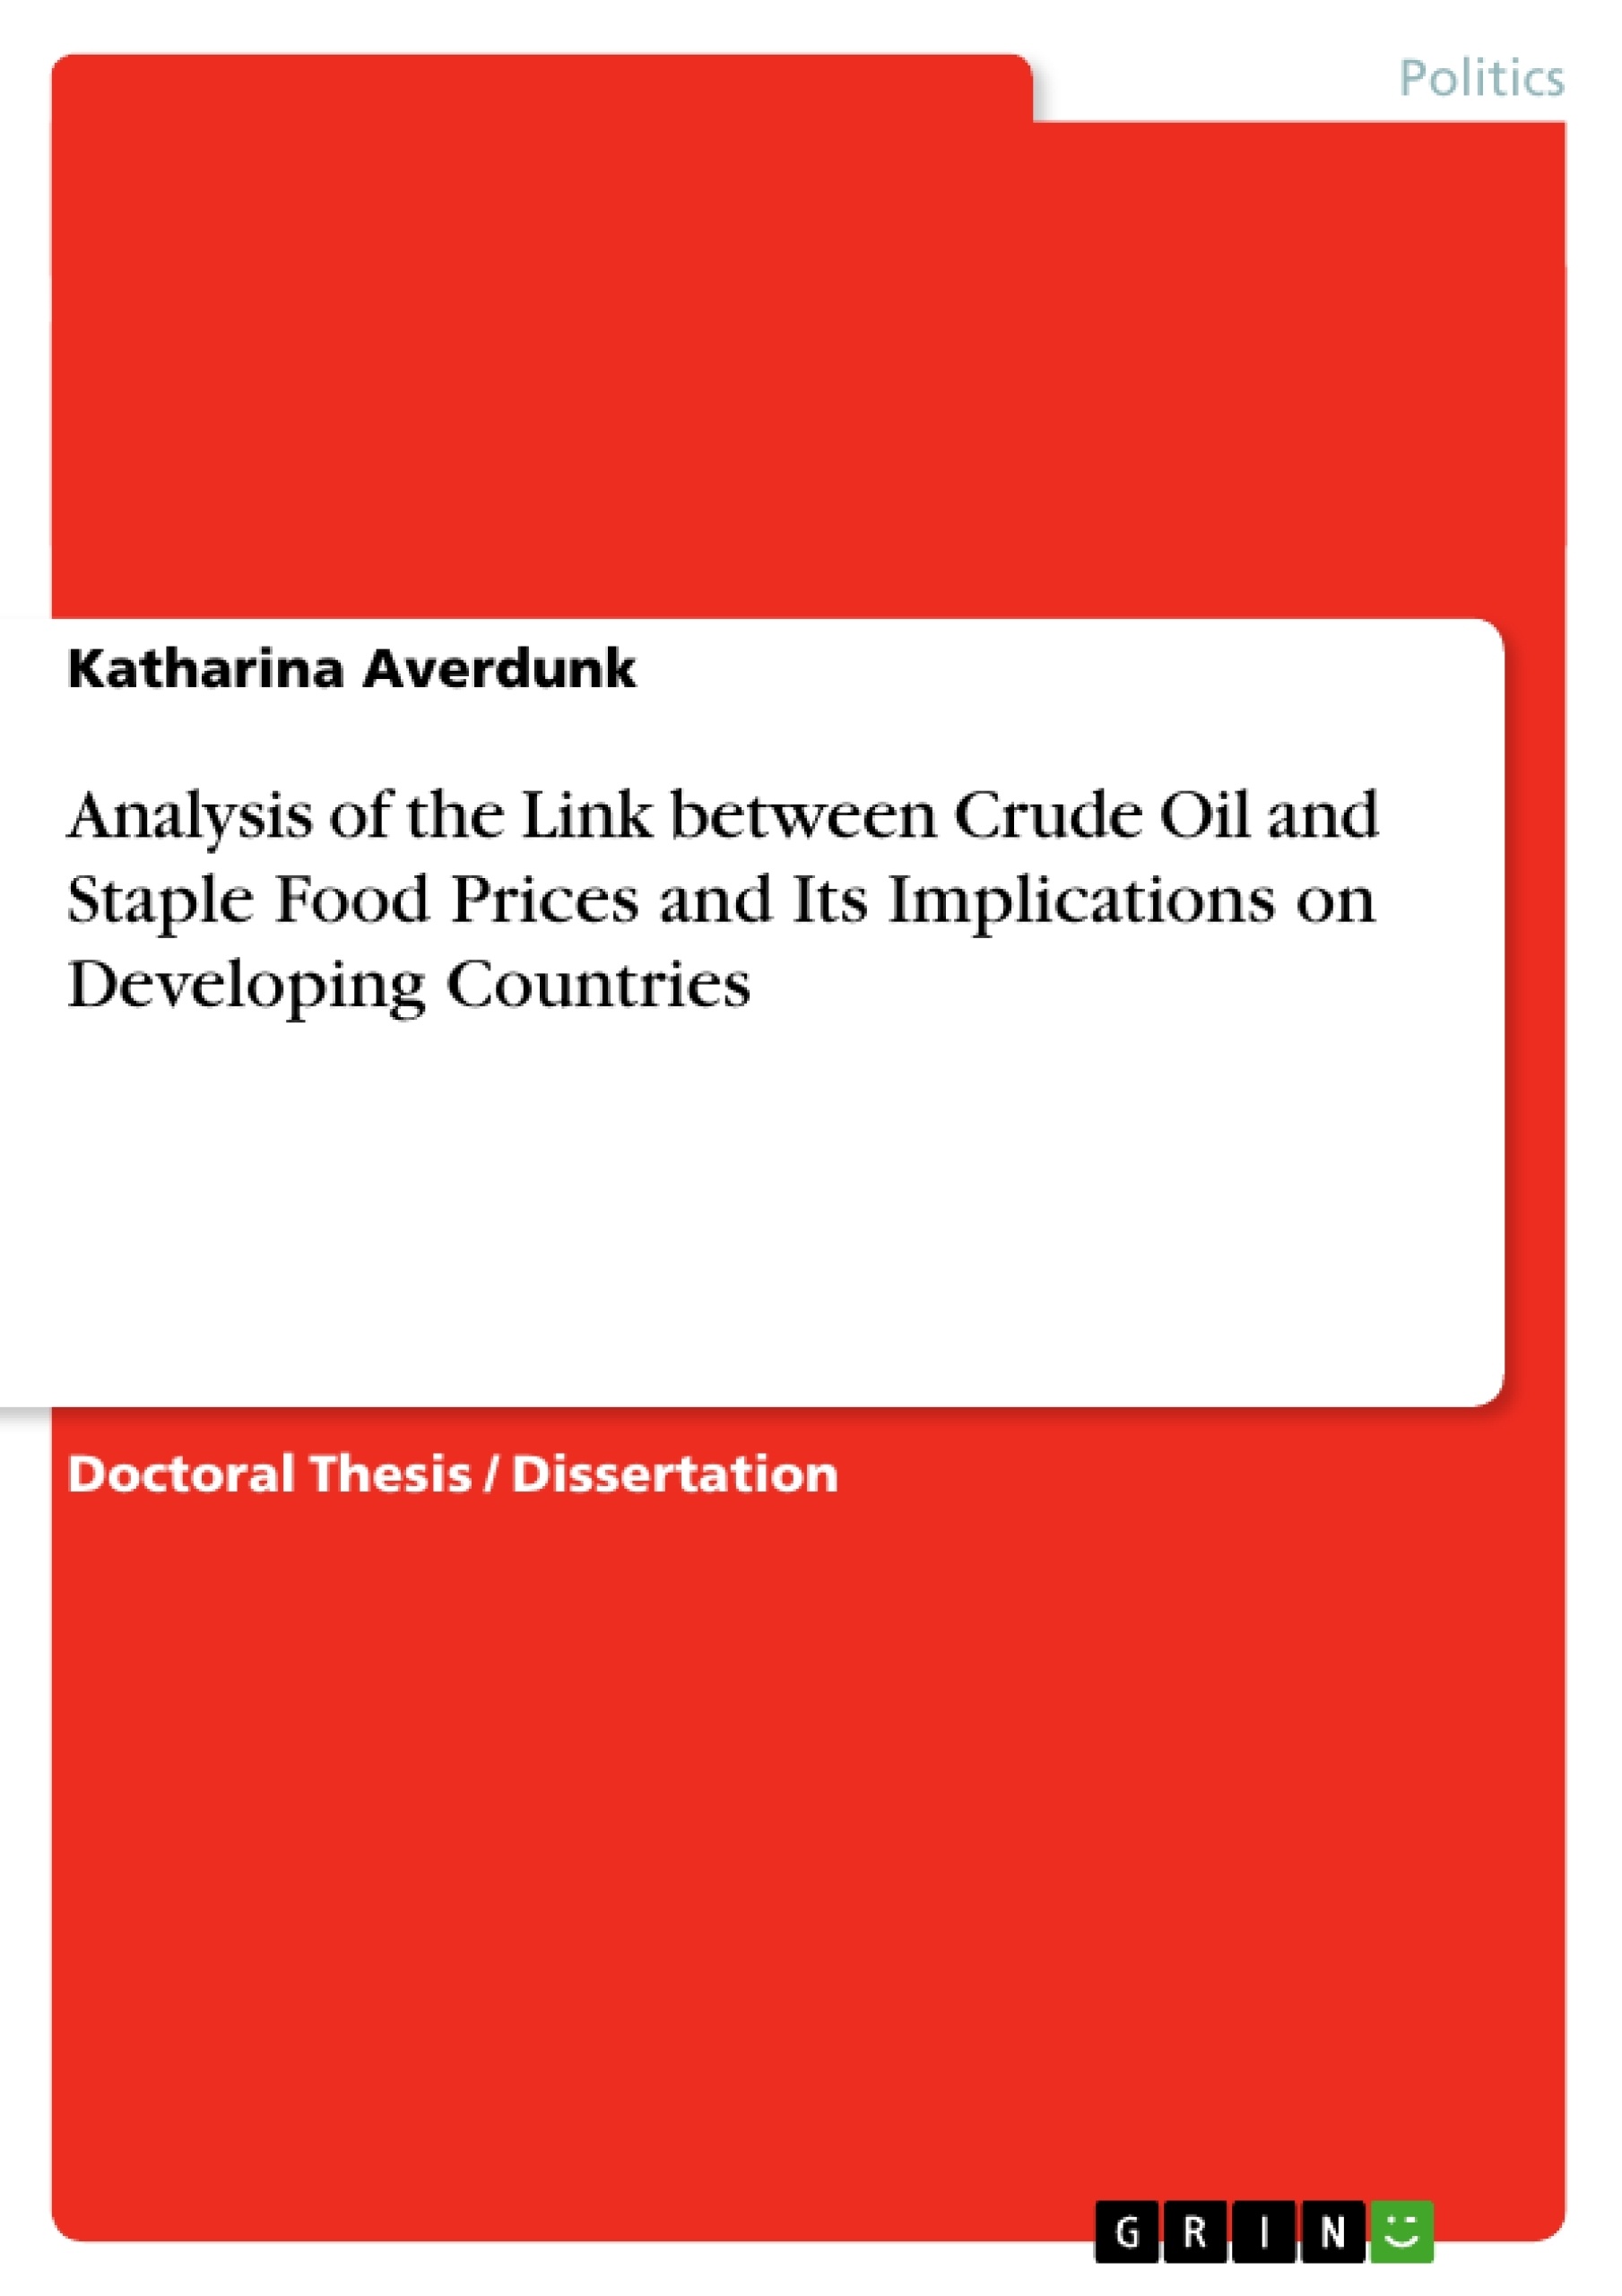 Thesis on food inflation